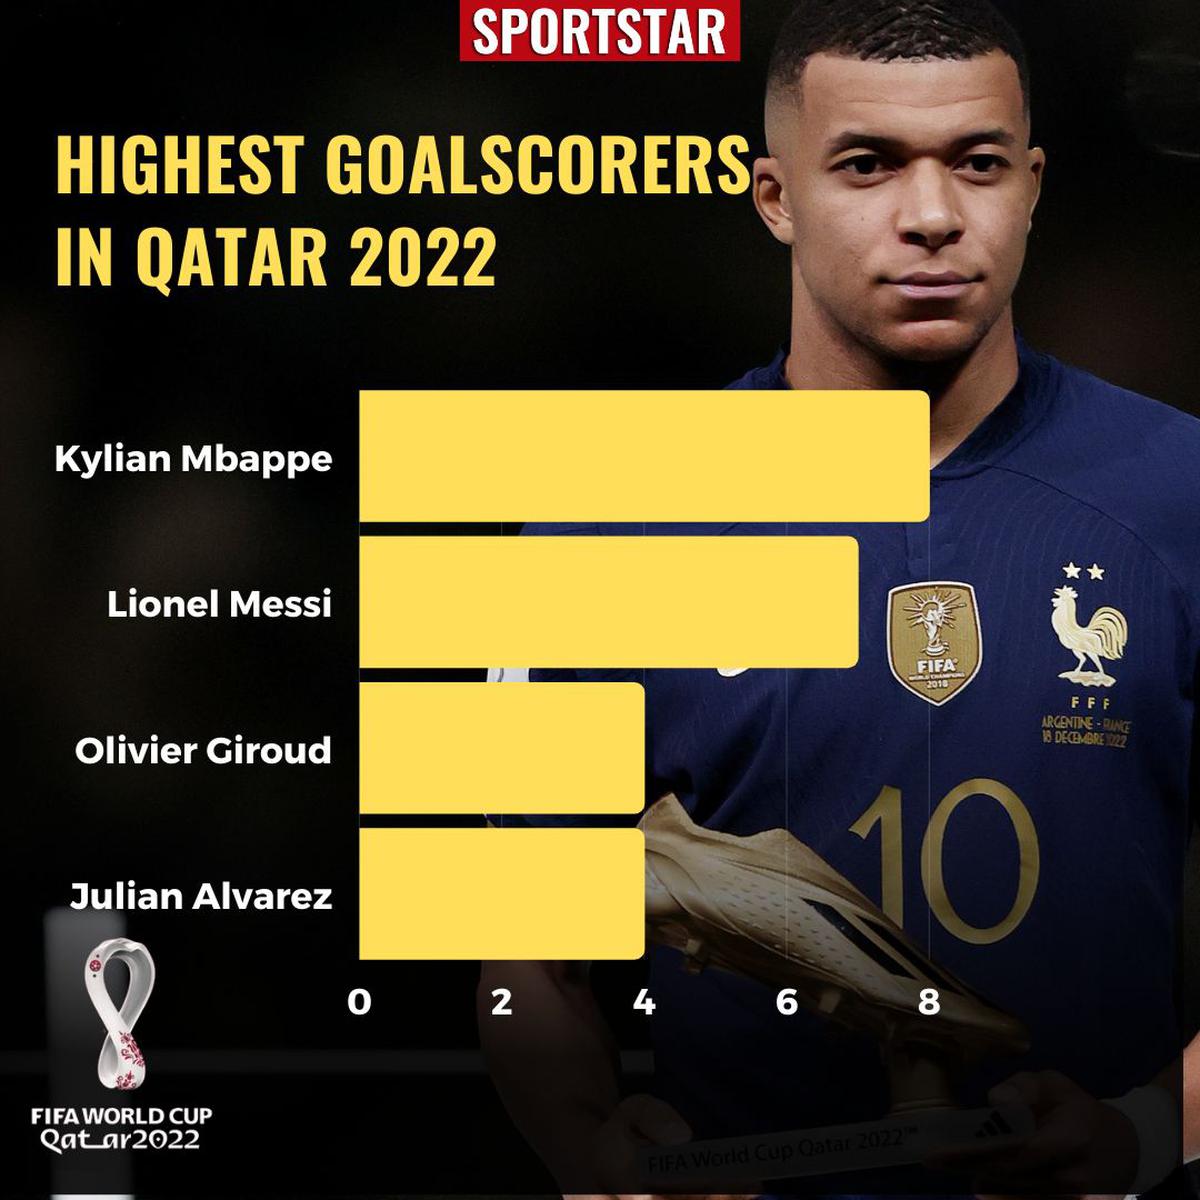 Which team scored first, last goal; how many goals were scored in total in FIFA World Cup Qatar 2022?